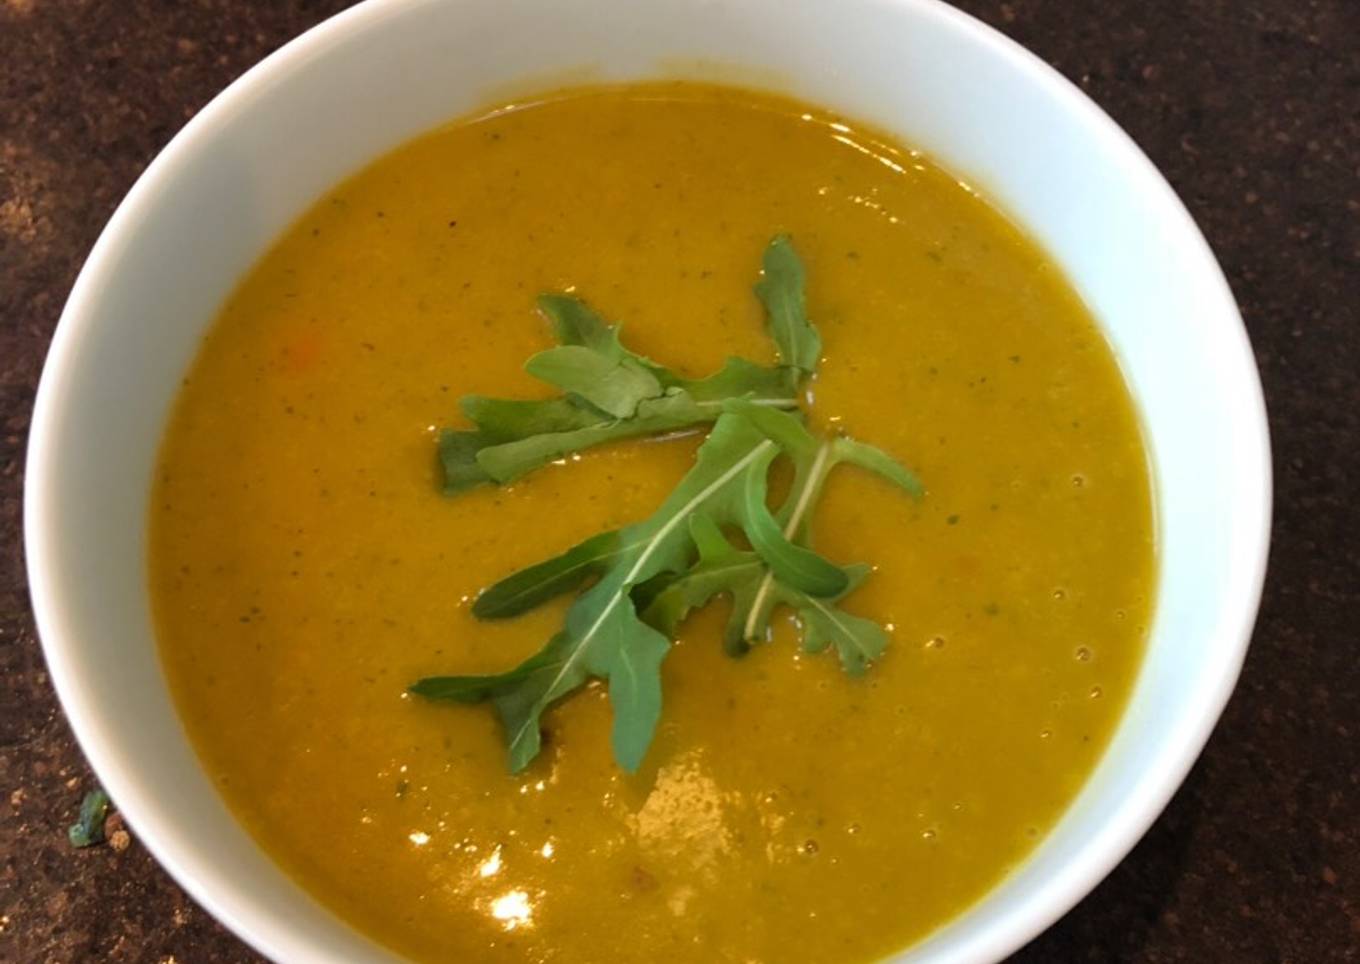 Carrot and coriander soup